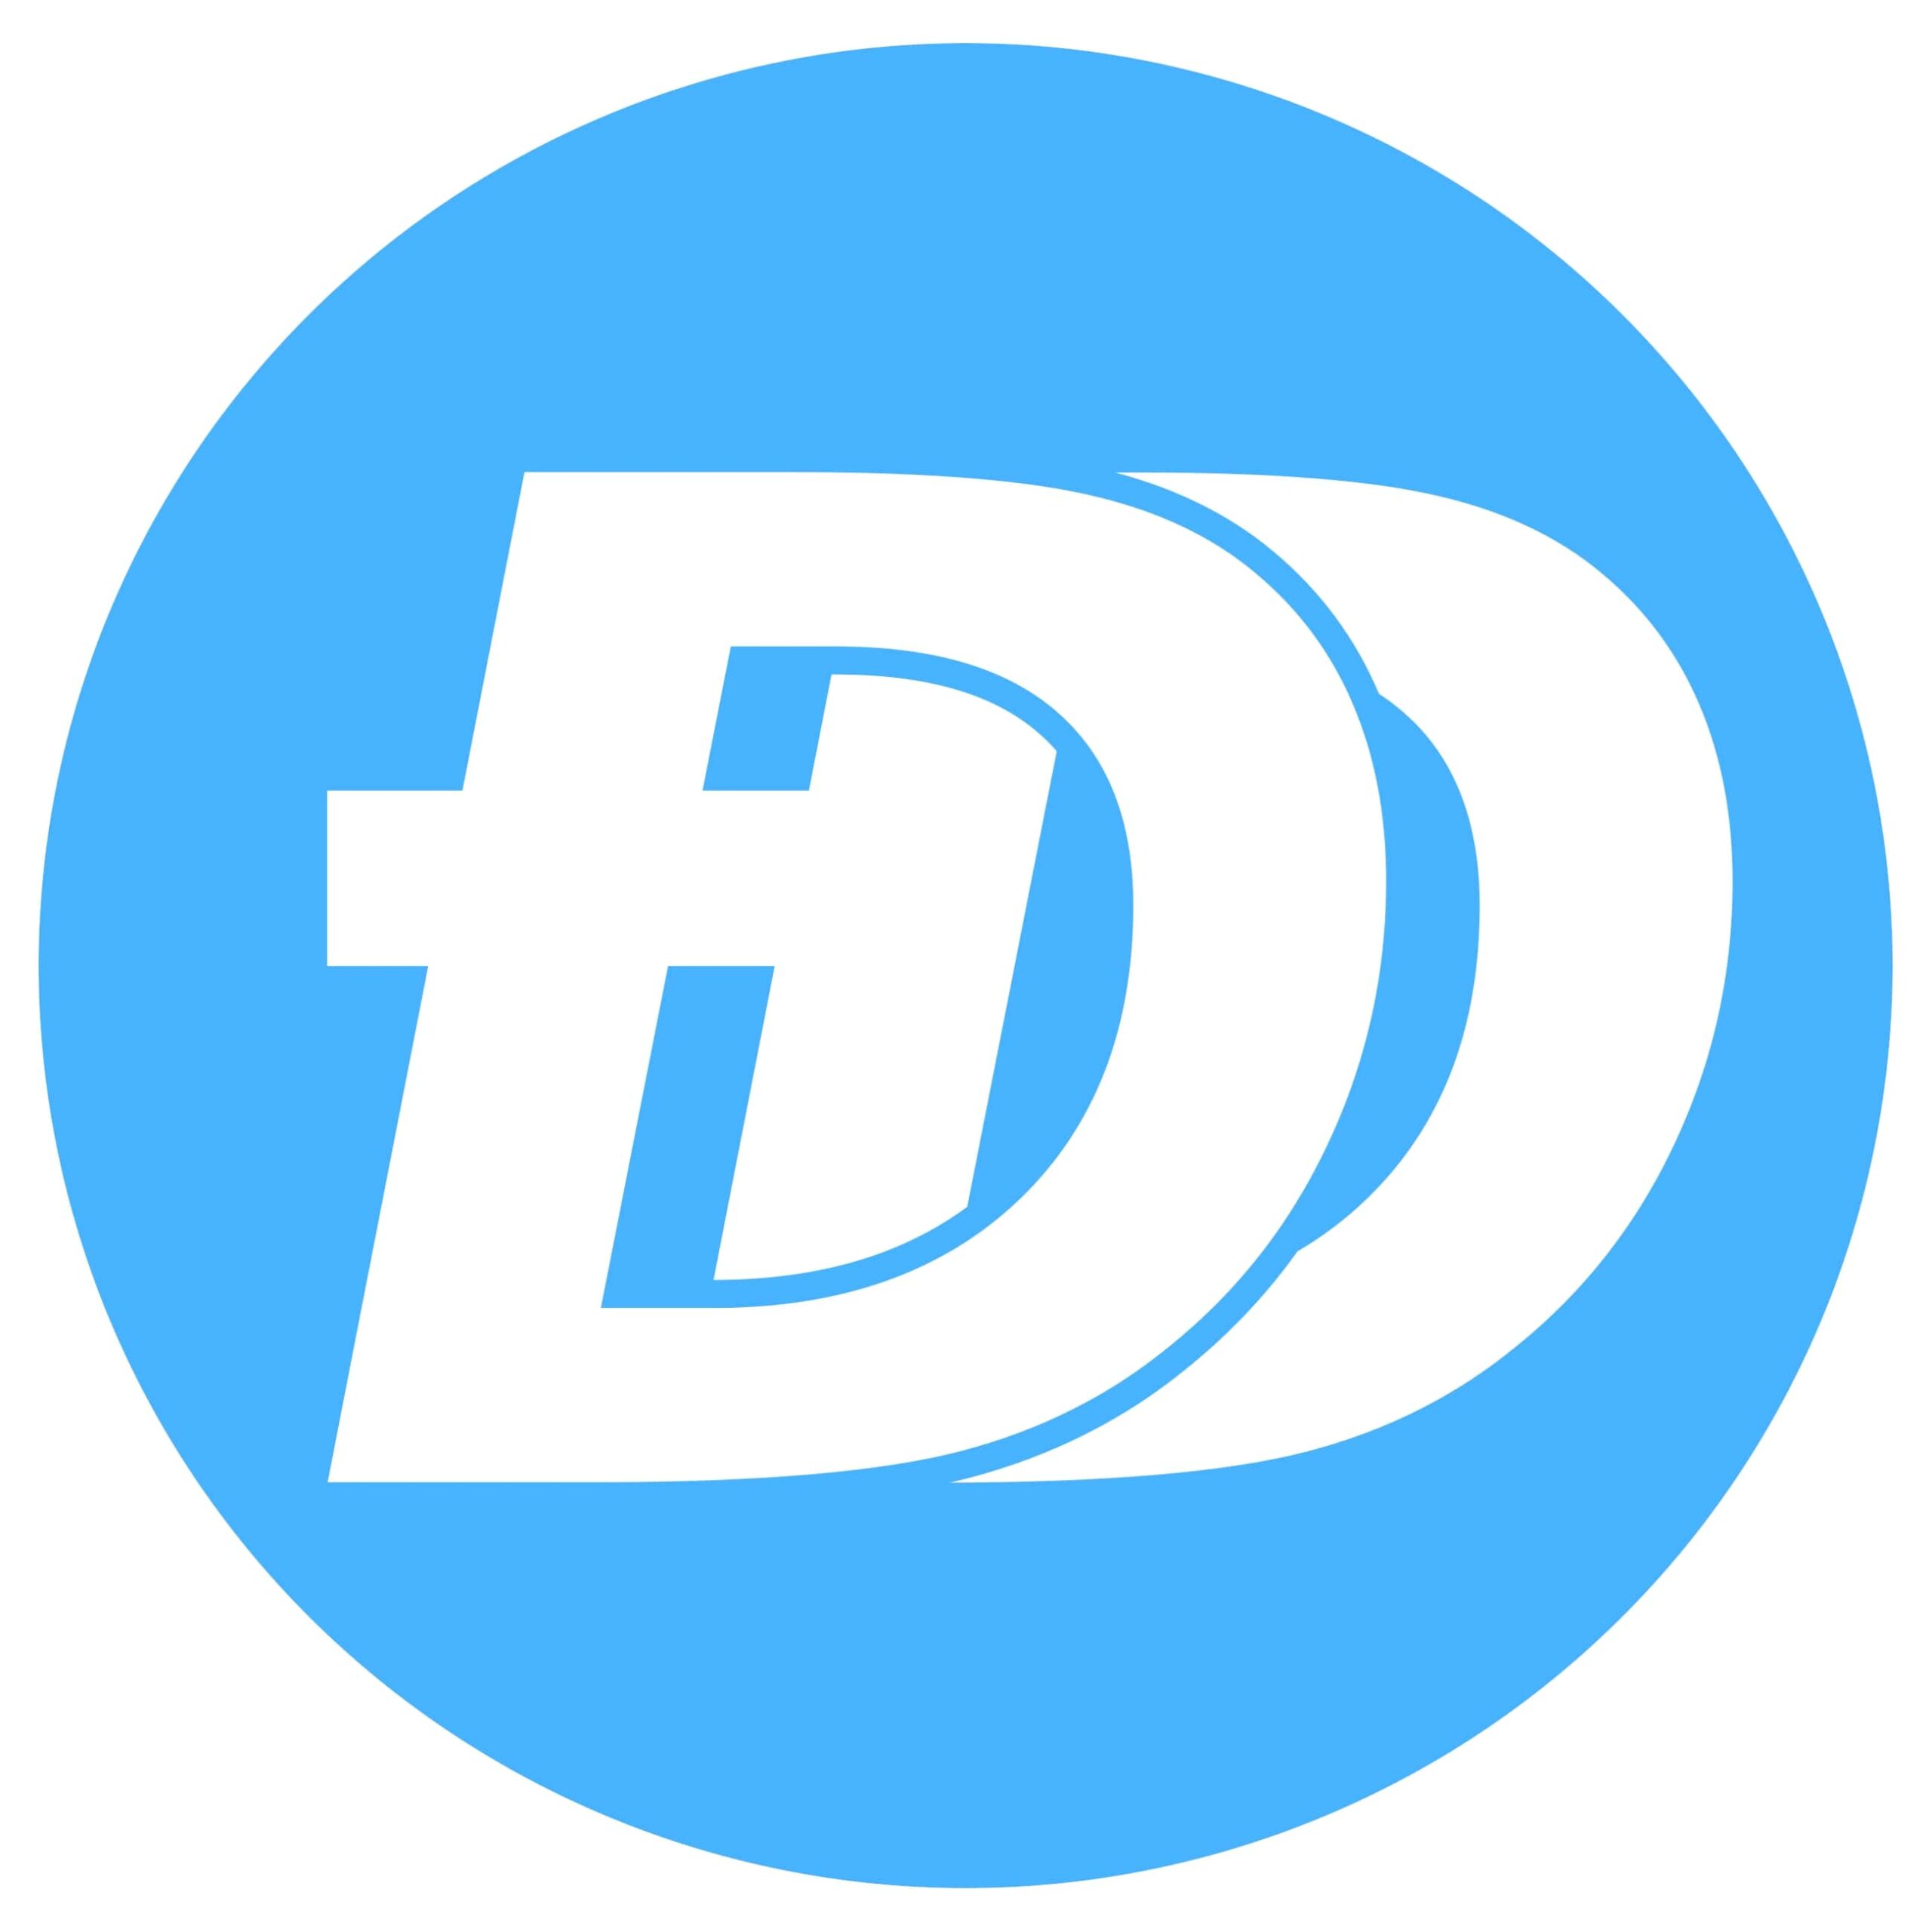 A logo-style graphic with a blue circle with two interlocking white Ds on it